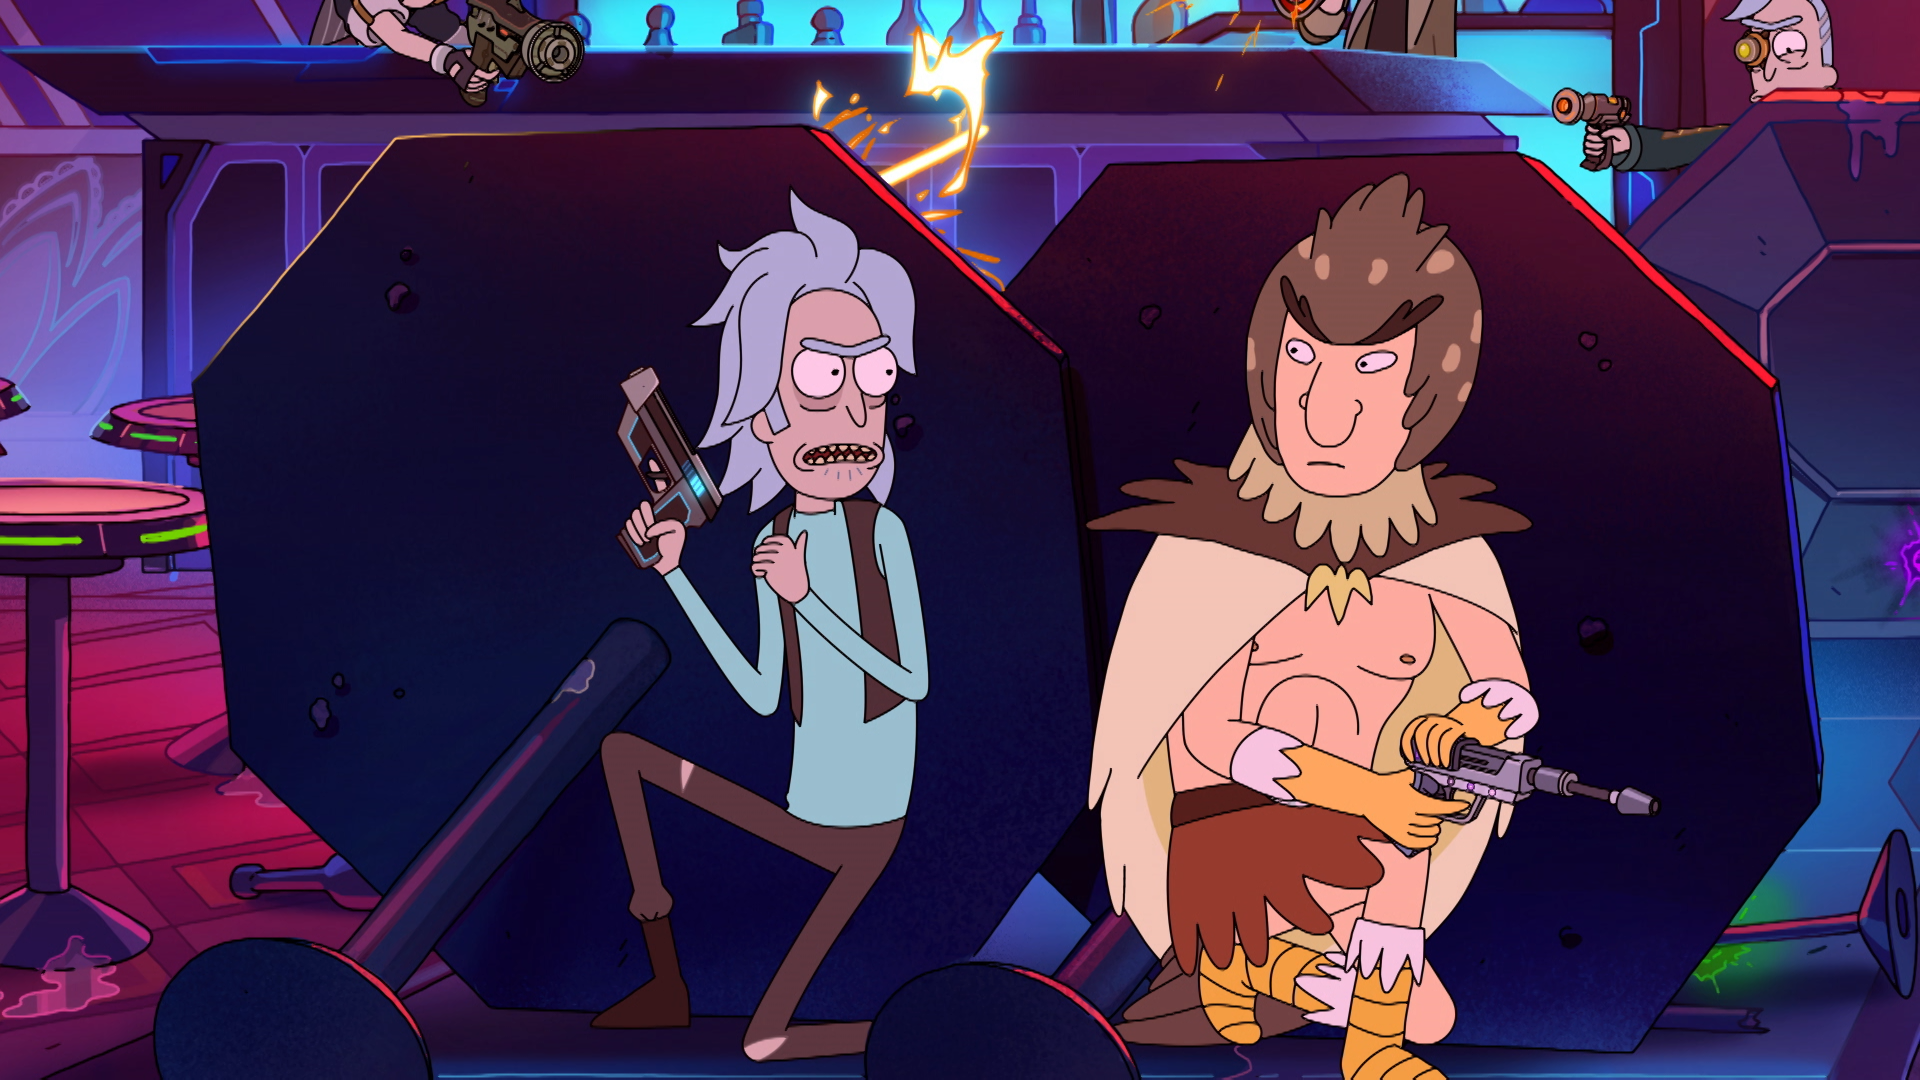 Rick and Bird Person, Rick and Morty, holding weaponry and hiding behind a table